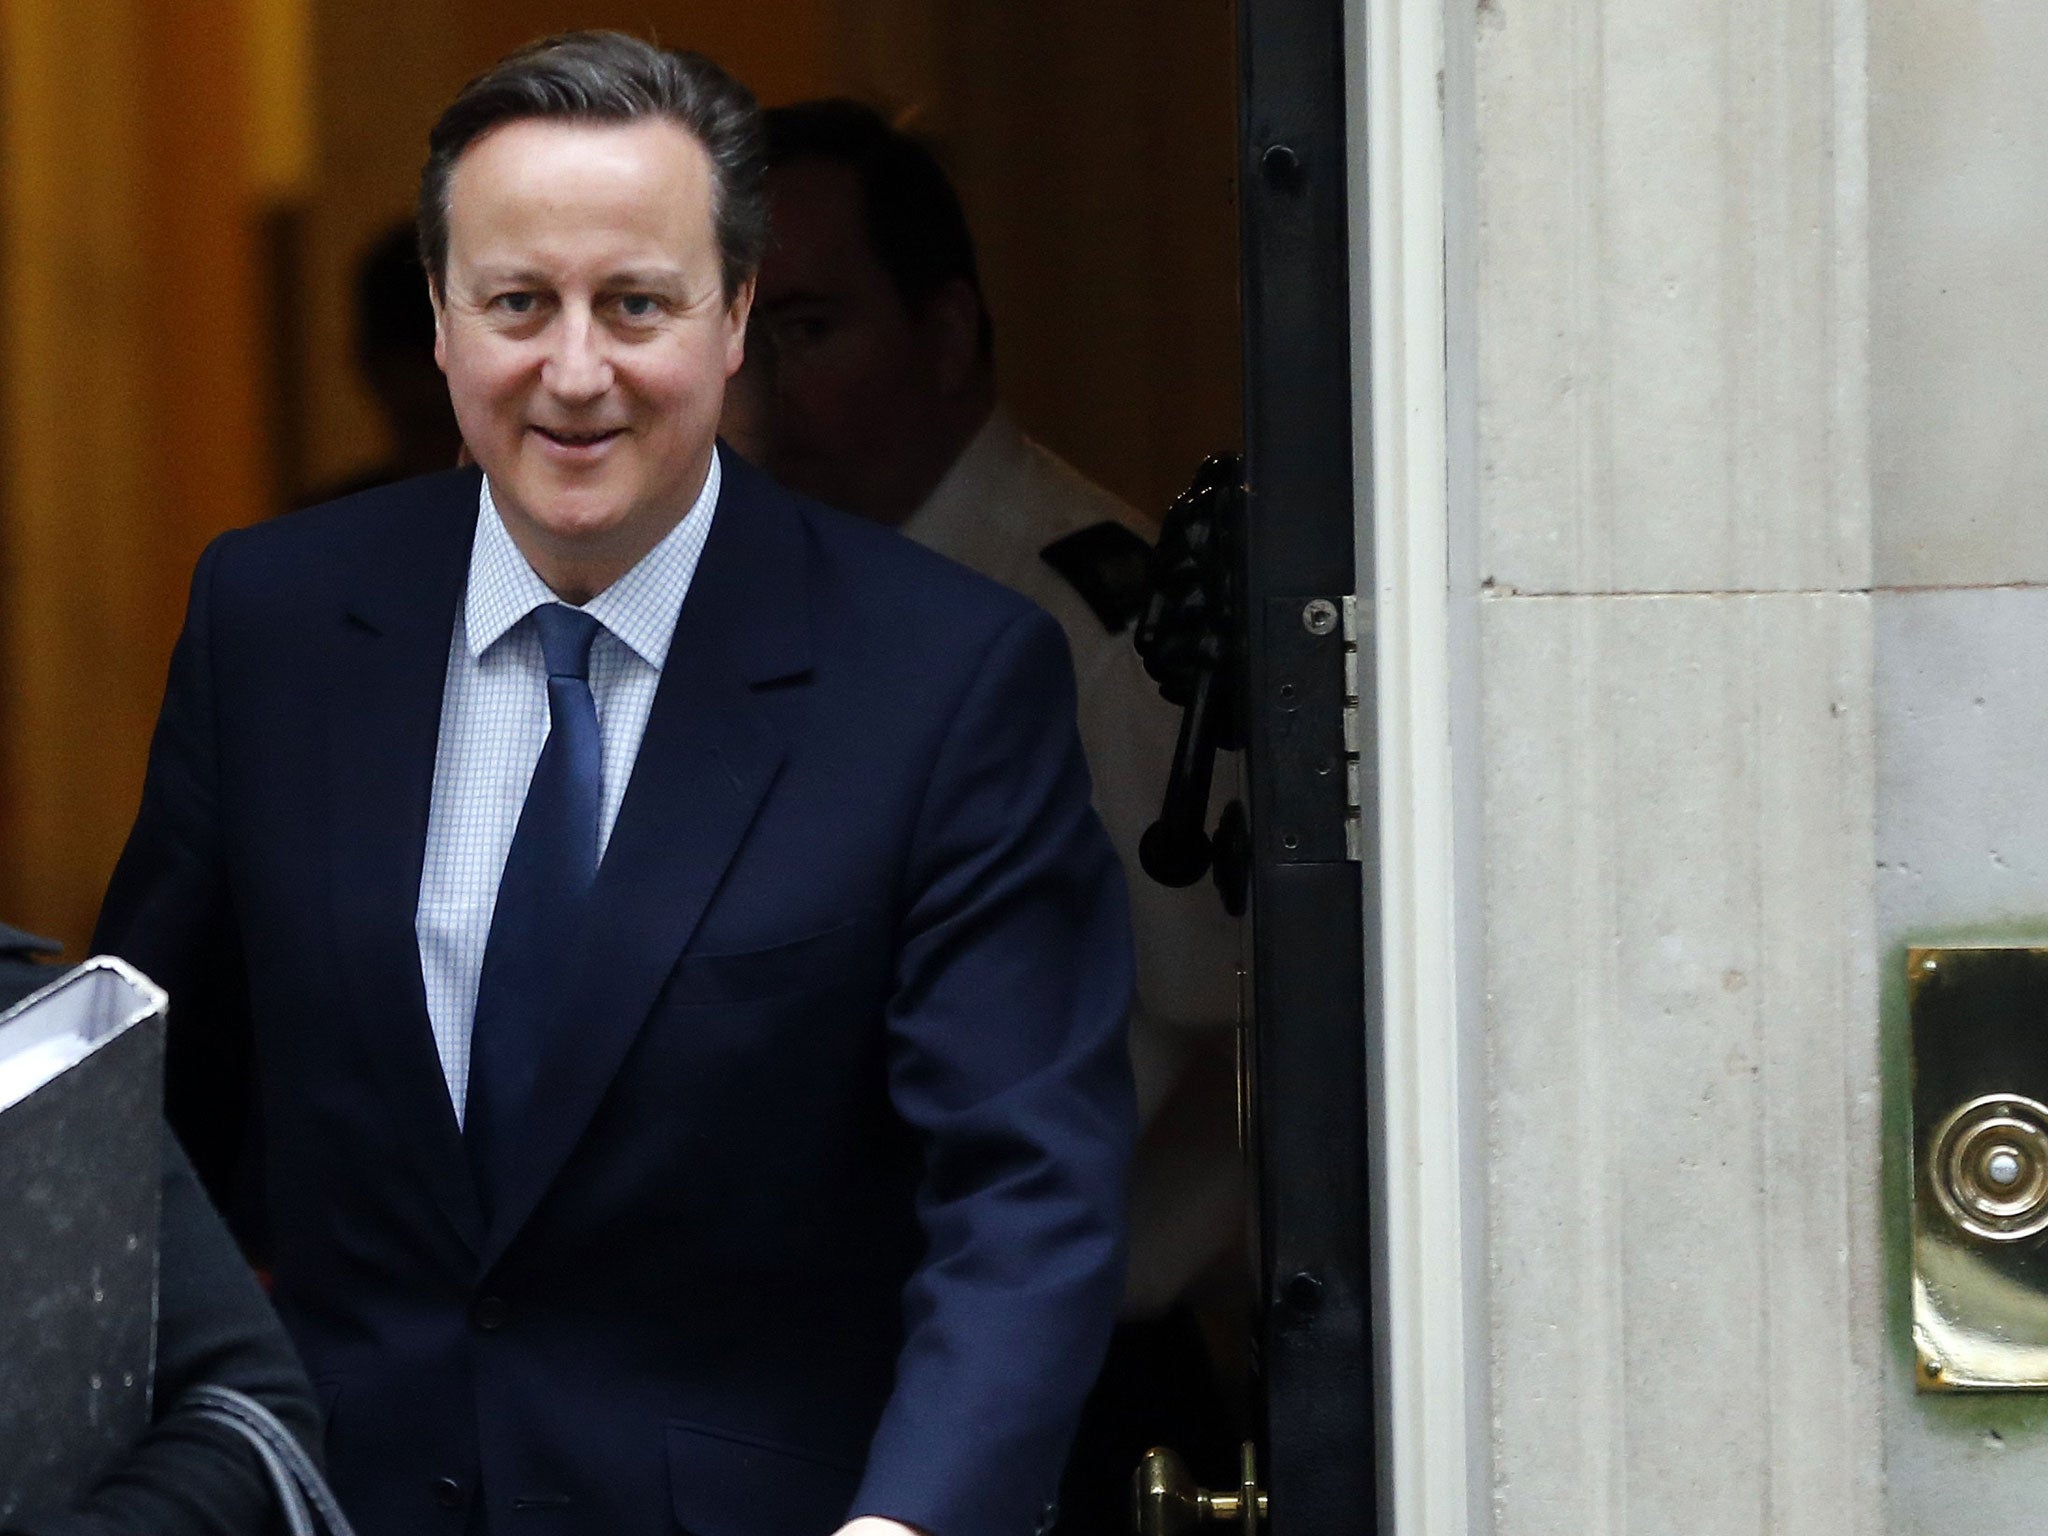 David Cameron leaves No 10 to attend PMQs on 27 January 2016